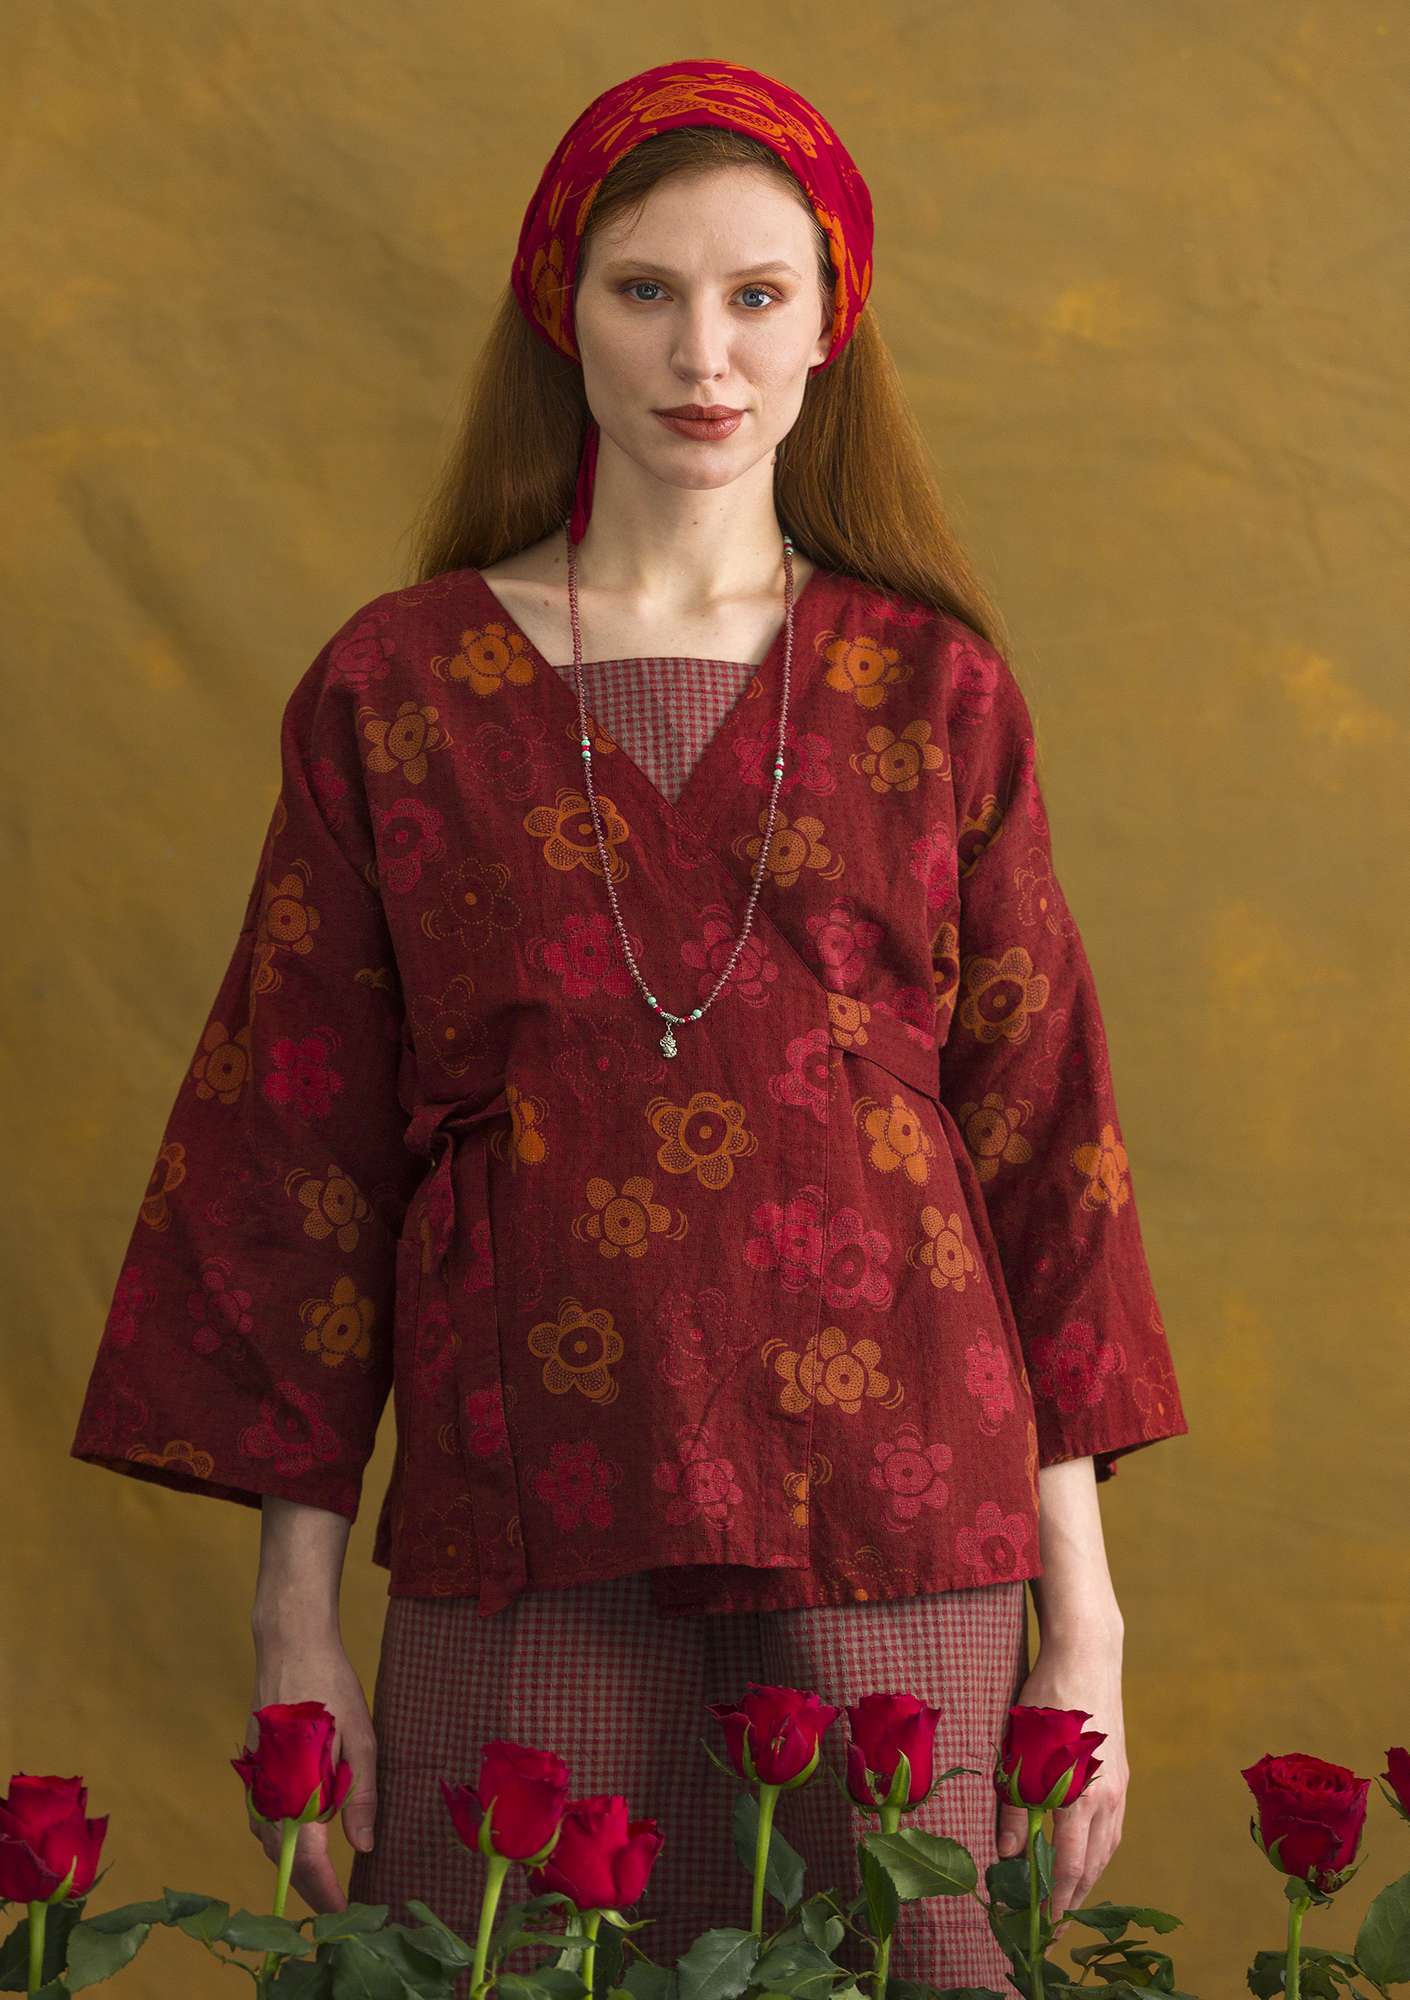 “Lindblom” organic cotton/linen blouse-style jacket agate red/patterned thumbnail